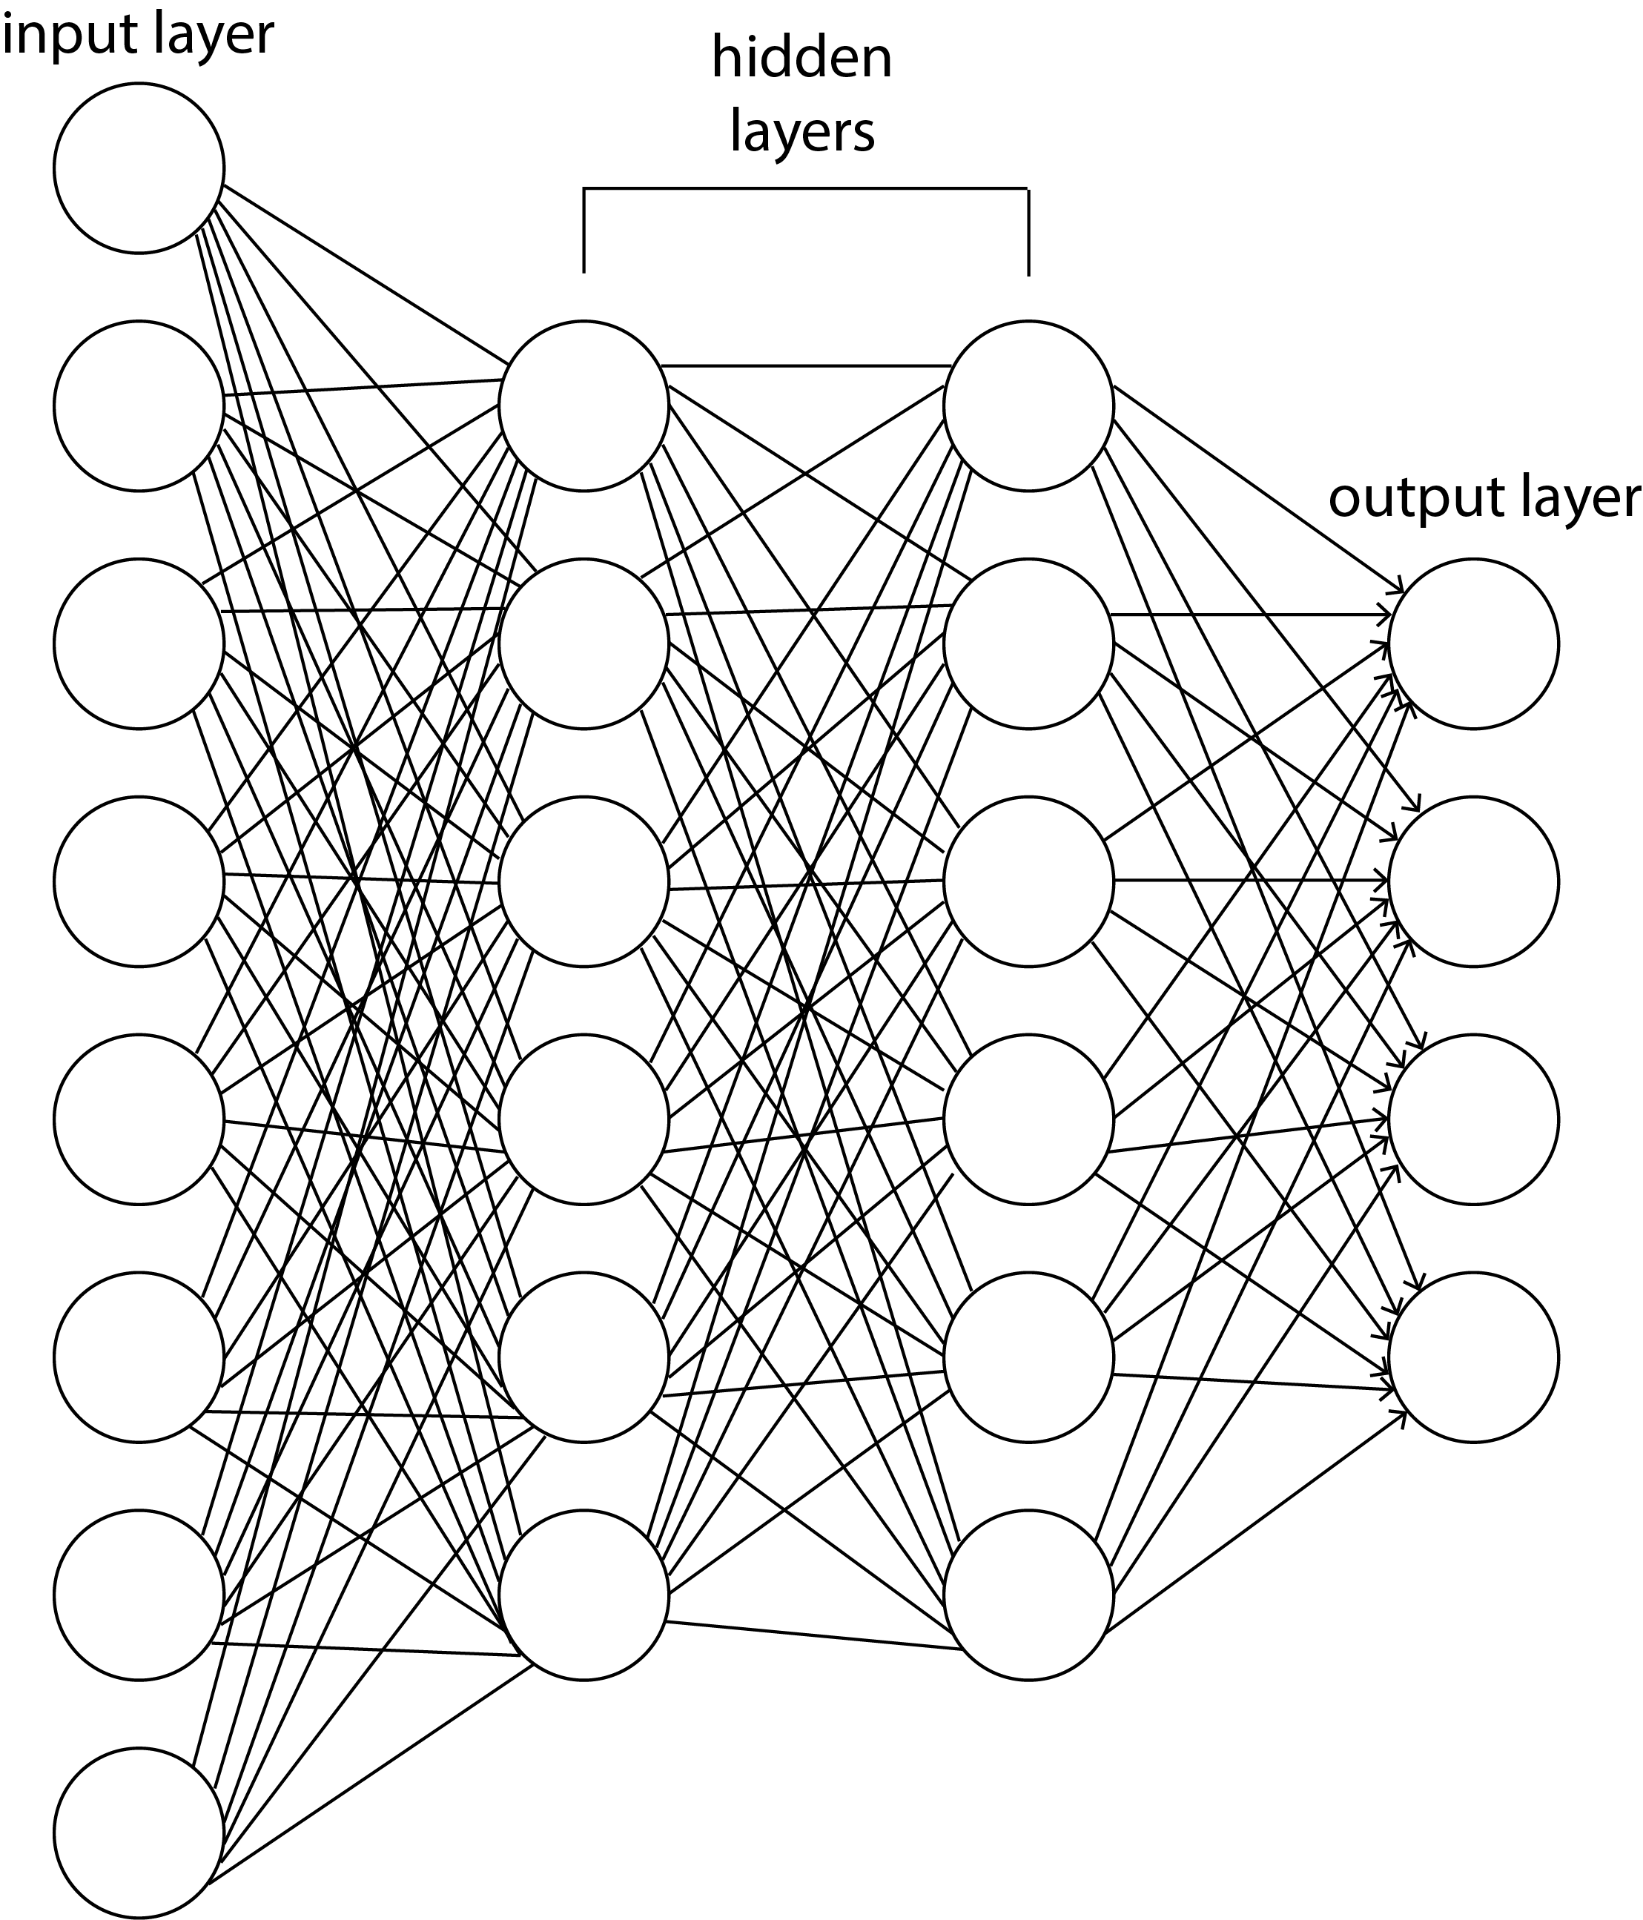 A visual representation of a neural network, where an input layer feeds into hidden layers via many connections, eventually leading to an output layer